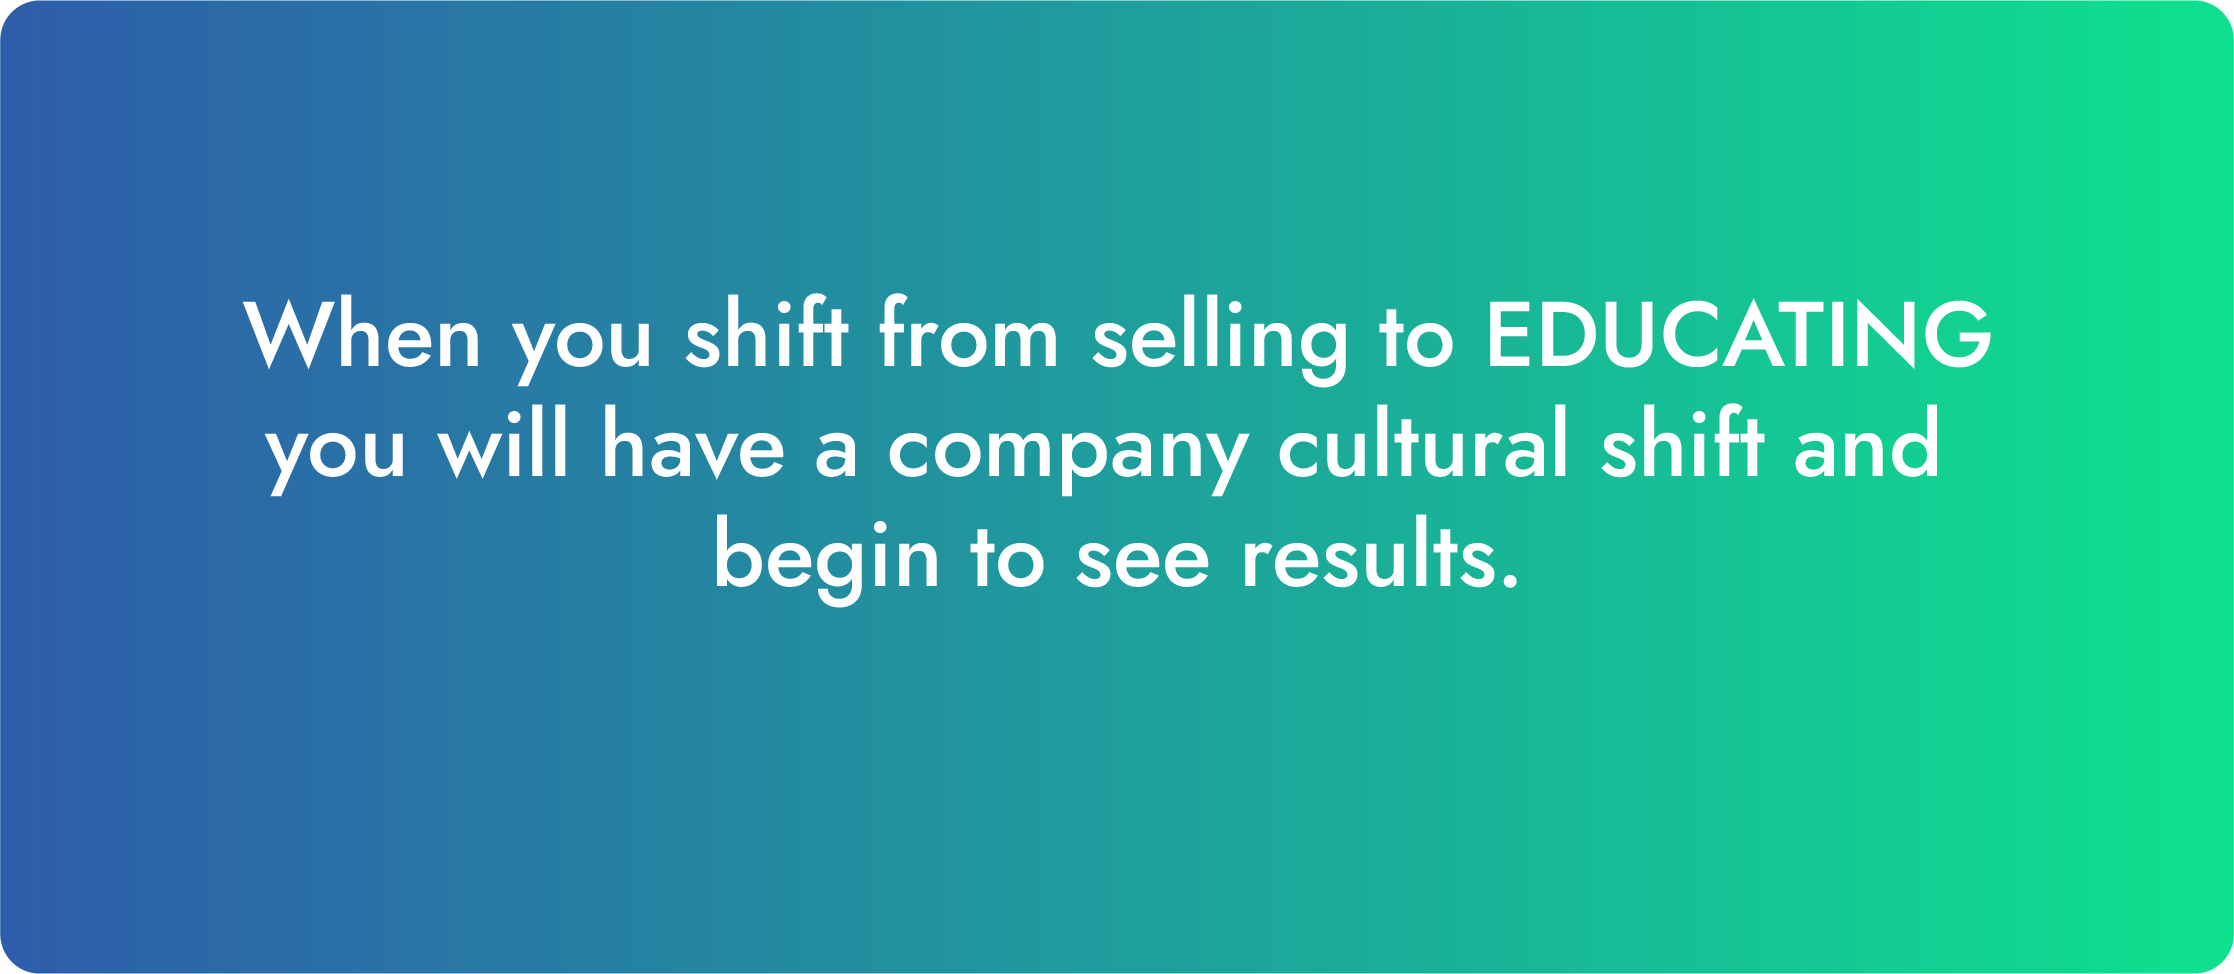 When you shift from selling to educating, you will have a company cultural shift and begin to see the results.